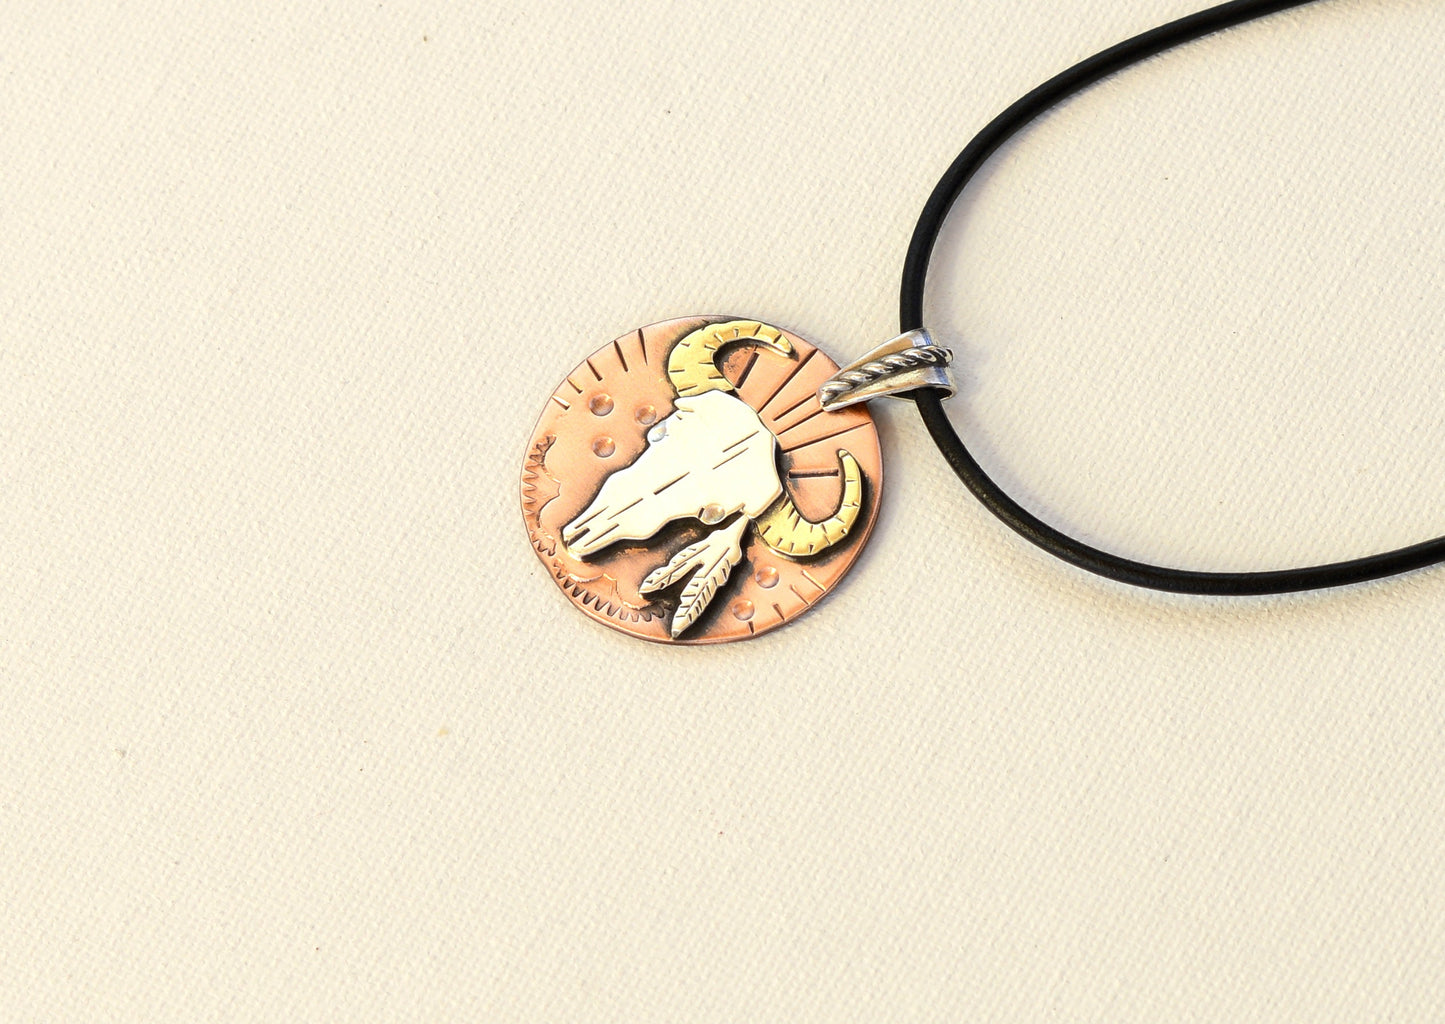 Cowboy or Cowgirl themed with Feathers and Bullhead Necklace in Copper Sterling Silver and Brass